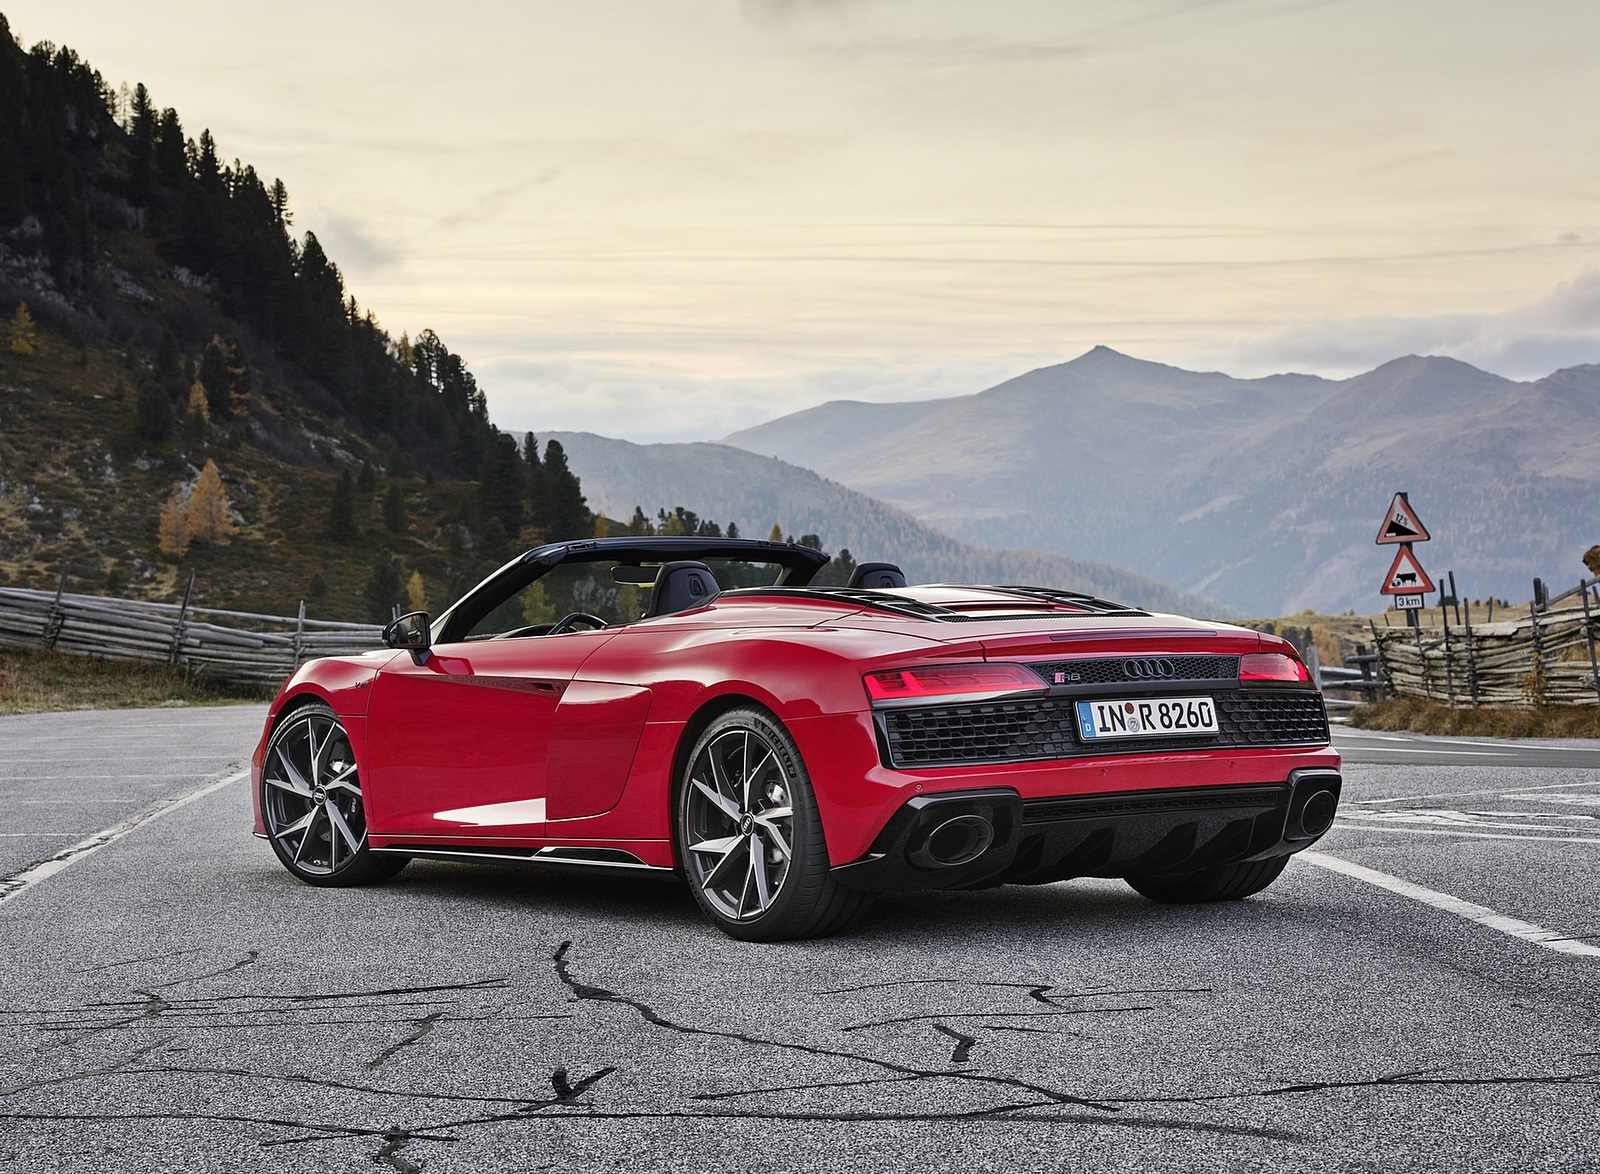 2020 Audi R8 V10 RWD Spyder (Color: Tango Red) Rear Three-Quarter Wallpapers #12 of 31